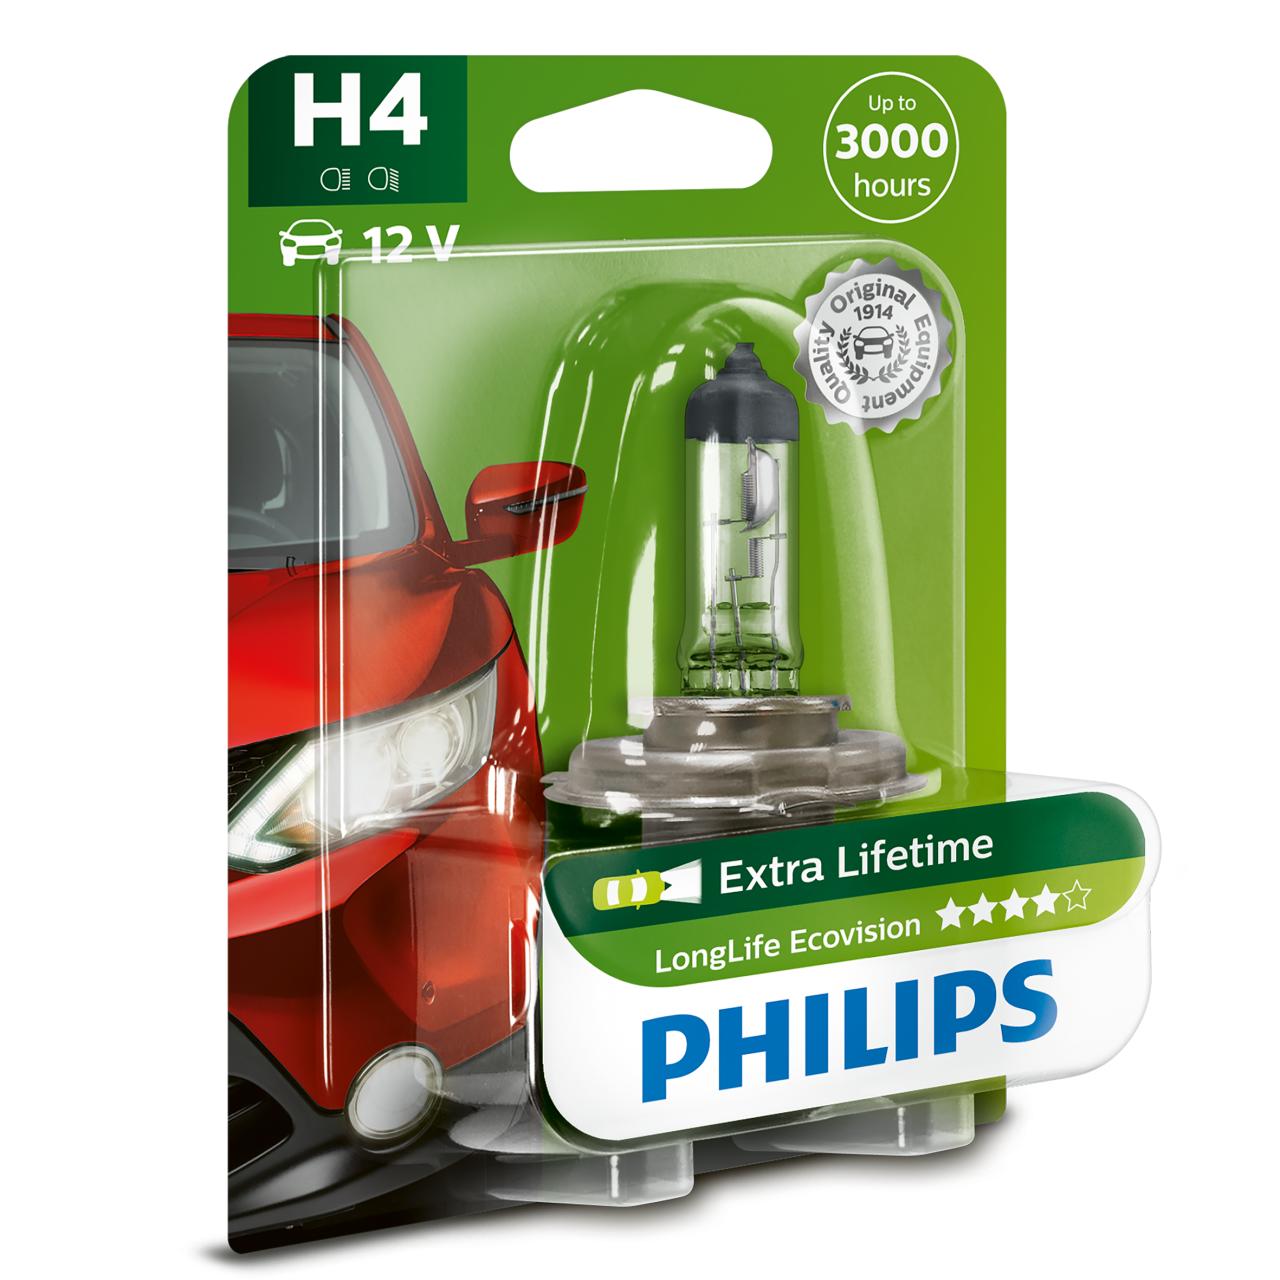 PHILIPS H4 AUTOLAMPE LONG LIFE ECO VISION